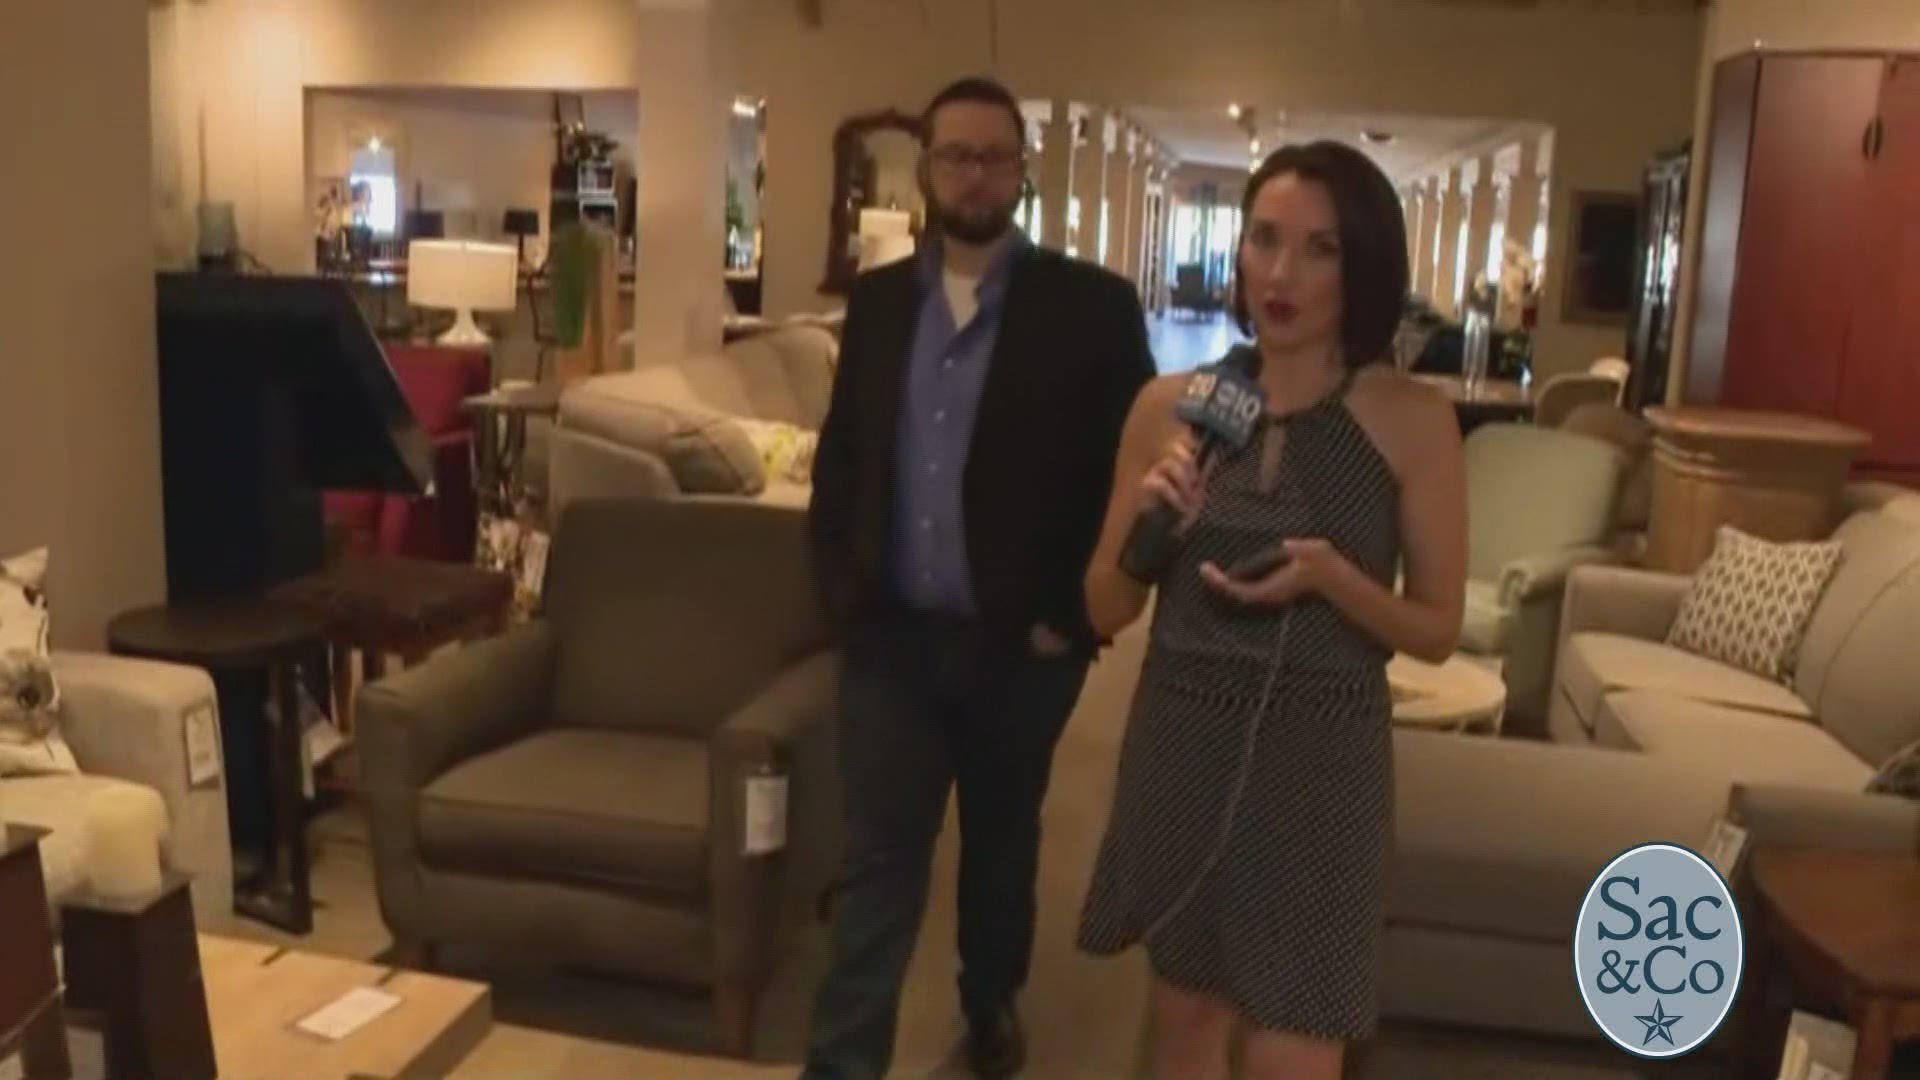 Check out McCreery’s Home Furnishing and see why they find it important to be involved in the St. Jude Dream Home Giveaway! The following is a paid segment sponsored by St. Jude.